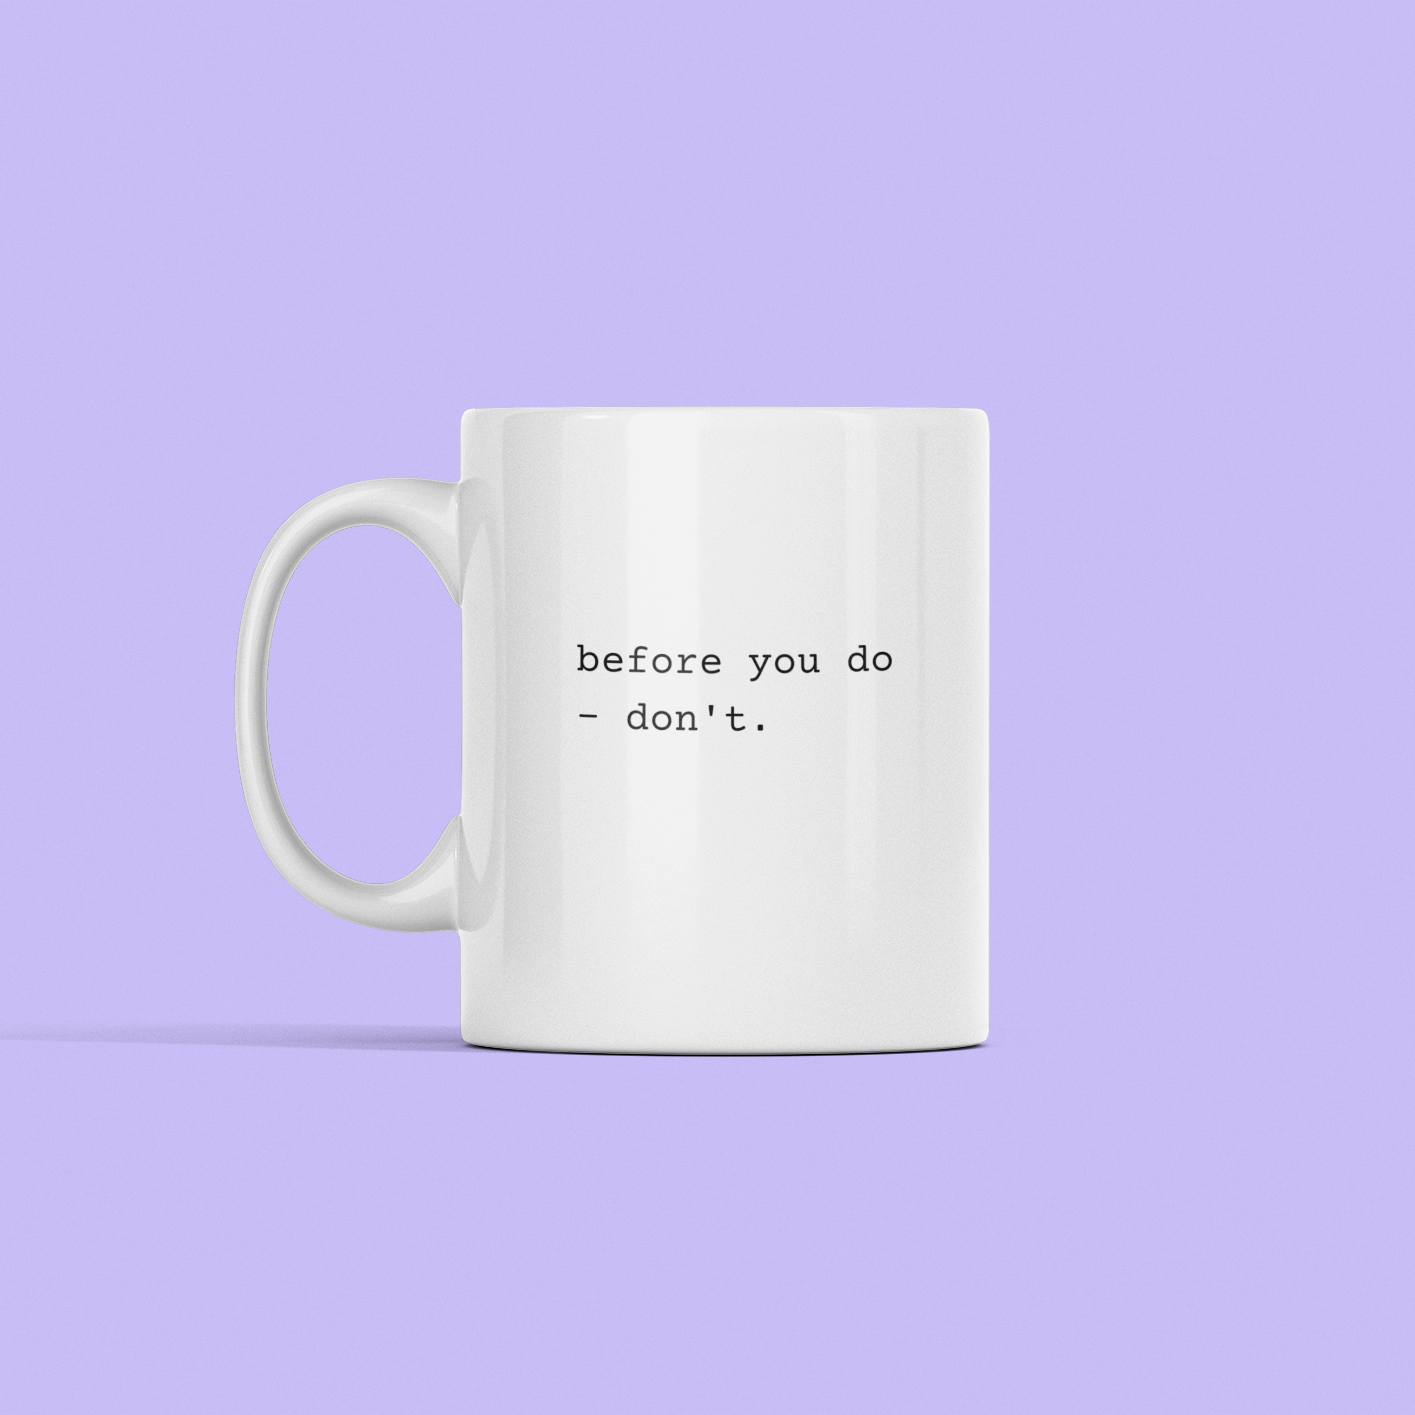 snarky mug that says, "Before you do - don't"